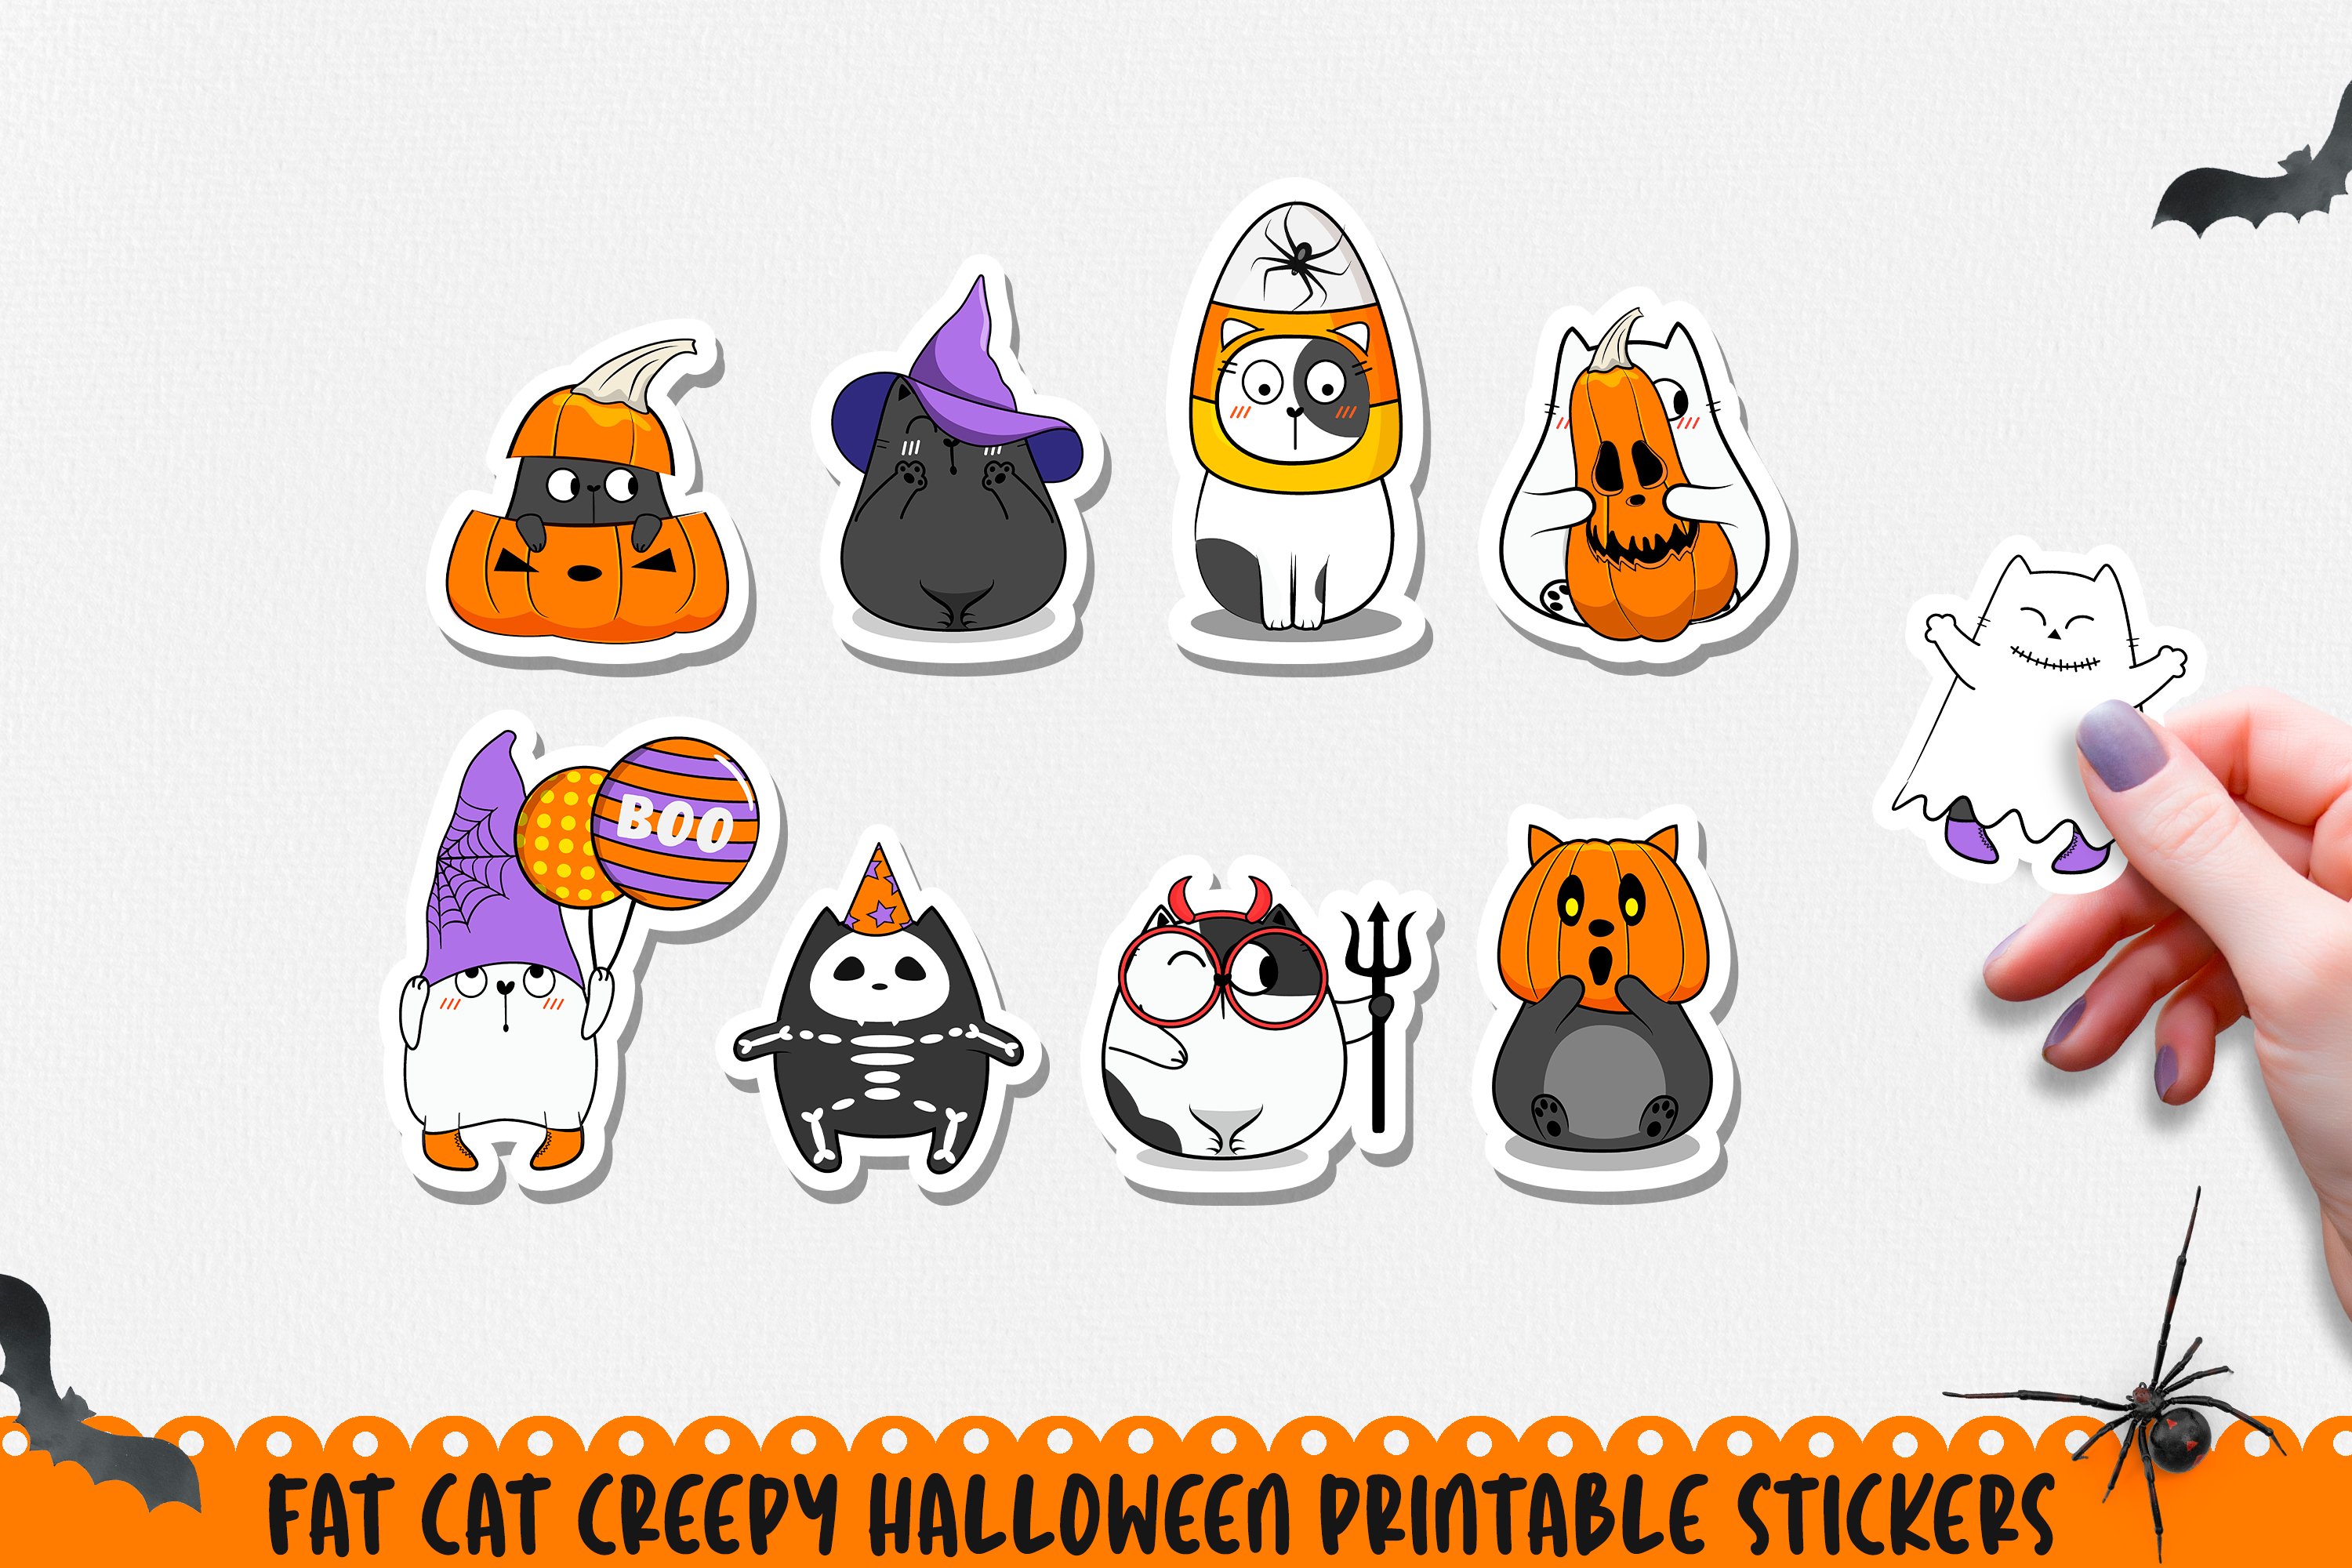 Stickers with a cat on the theme of Halloween.